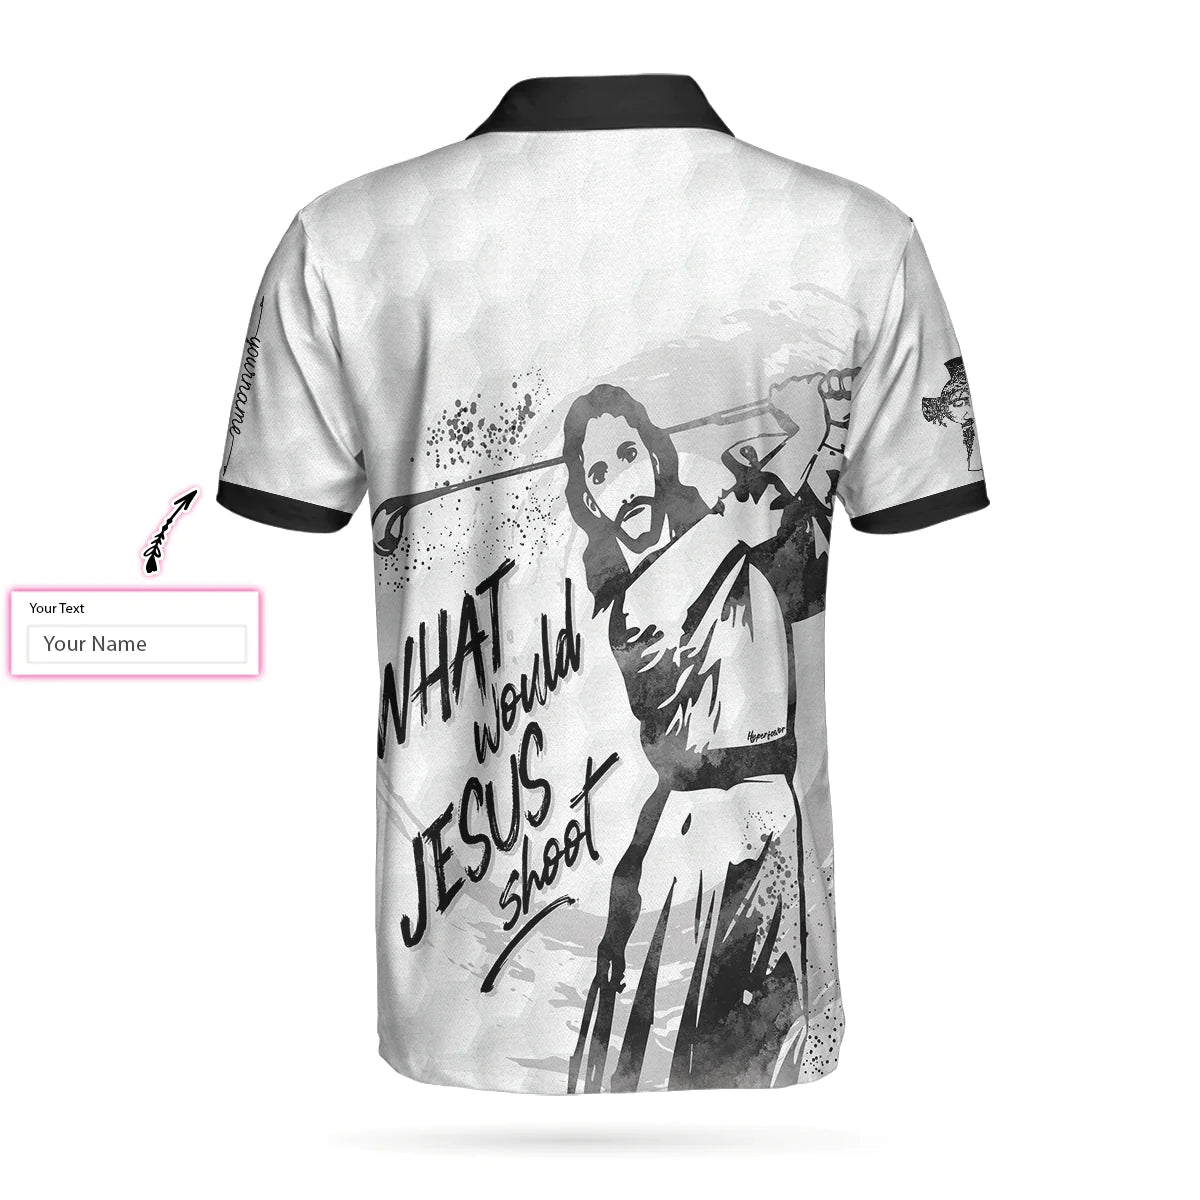 Customized Golf Shirt for Men: Black and White Polo with Jesus’ Choice of Weapon – GP432